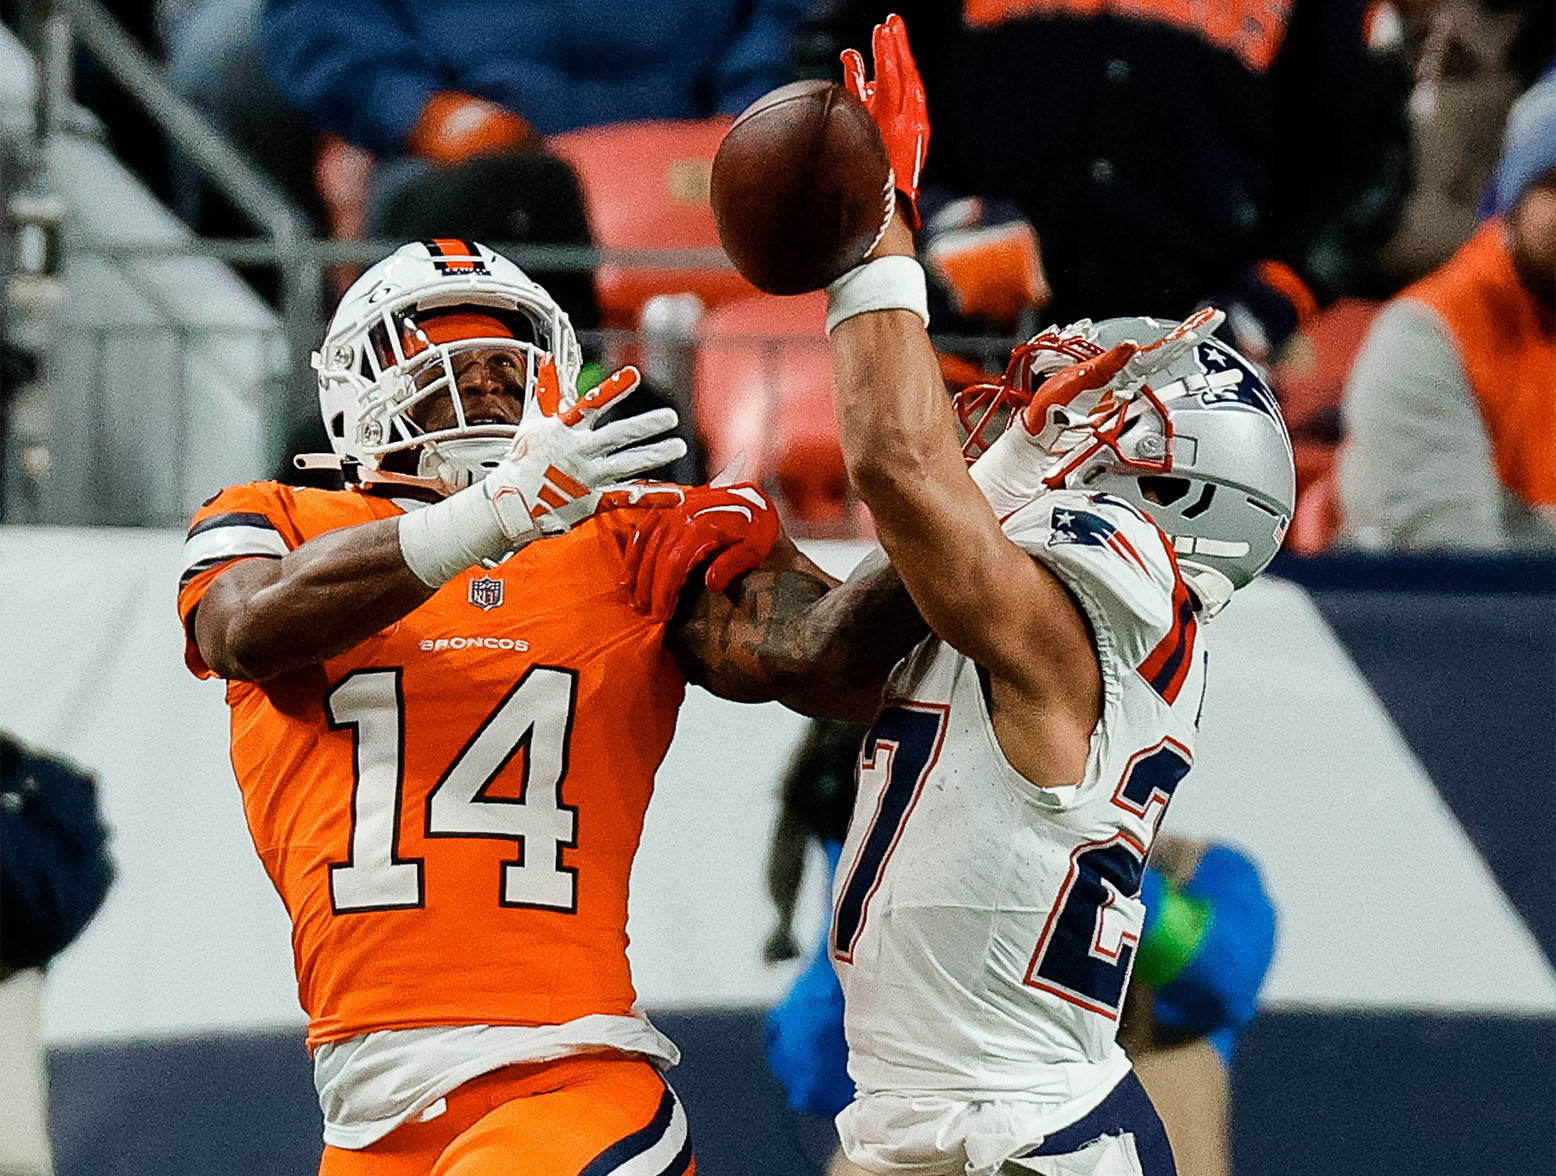 Dec 24, 2023; Denver, Colorado, USA; New England Patriots cornerback Myles Bryant (27) deflects a pass intended for Denver Broncos wide receiver Courtland Sutton (14) in the first quarter at Empower Field at Mile High. Mandatory Credit: Isaiah J. Downing-USA TODAY Sports